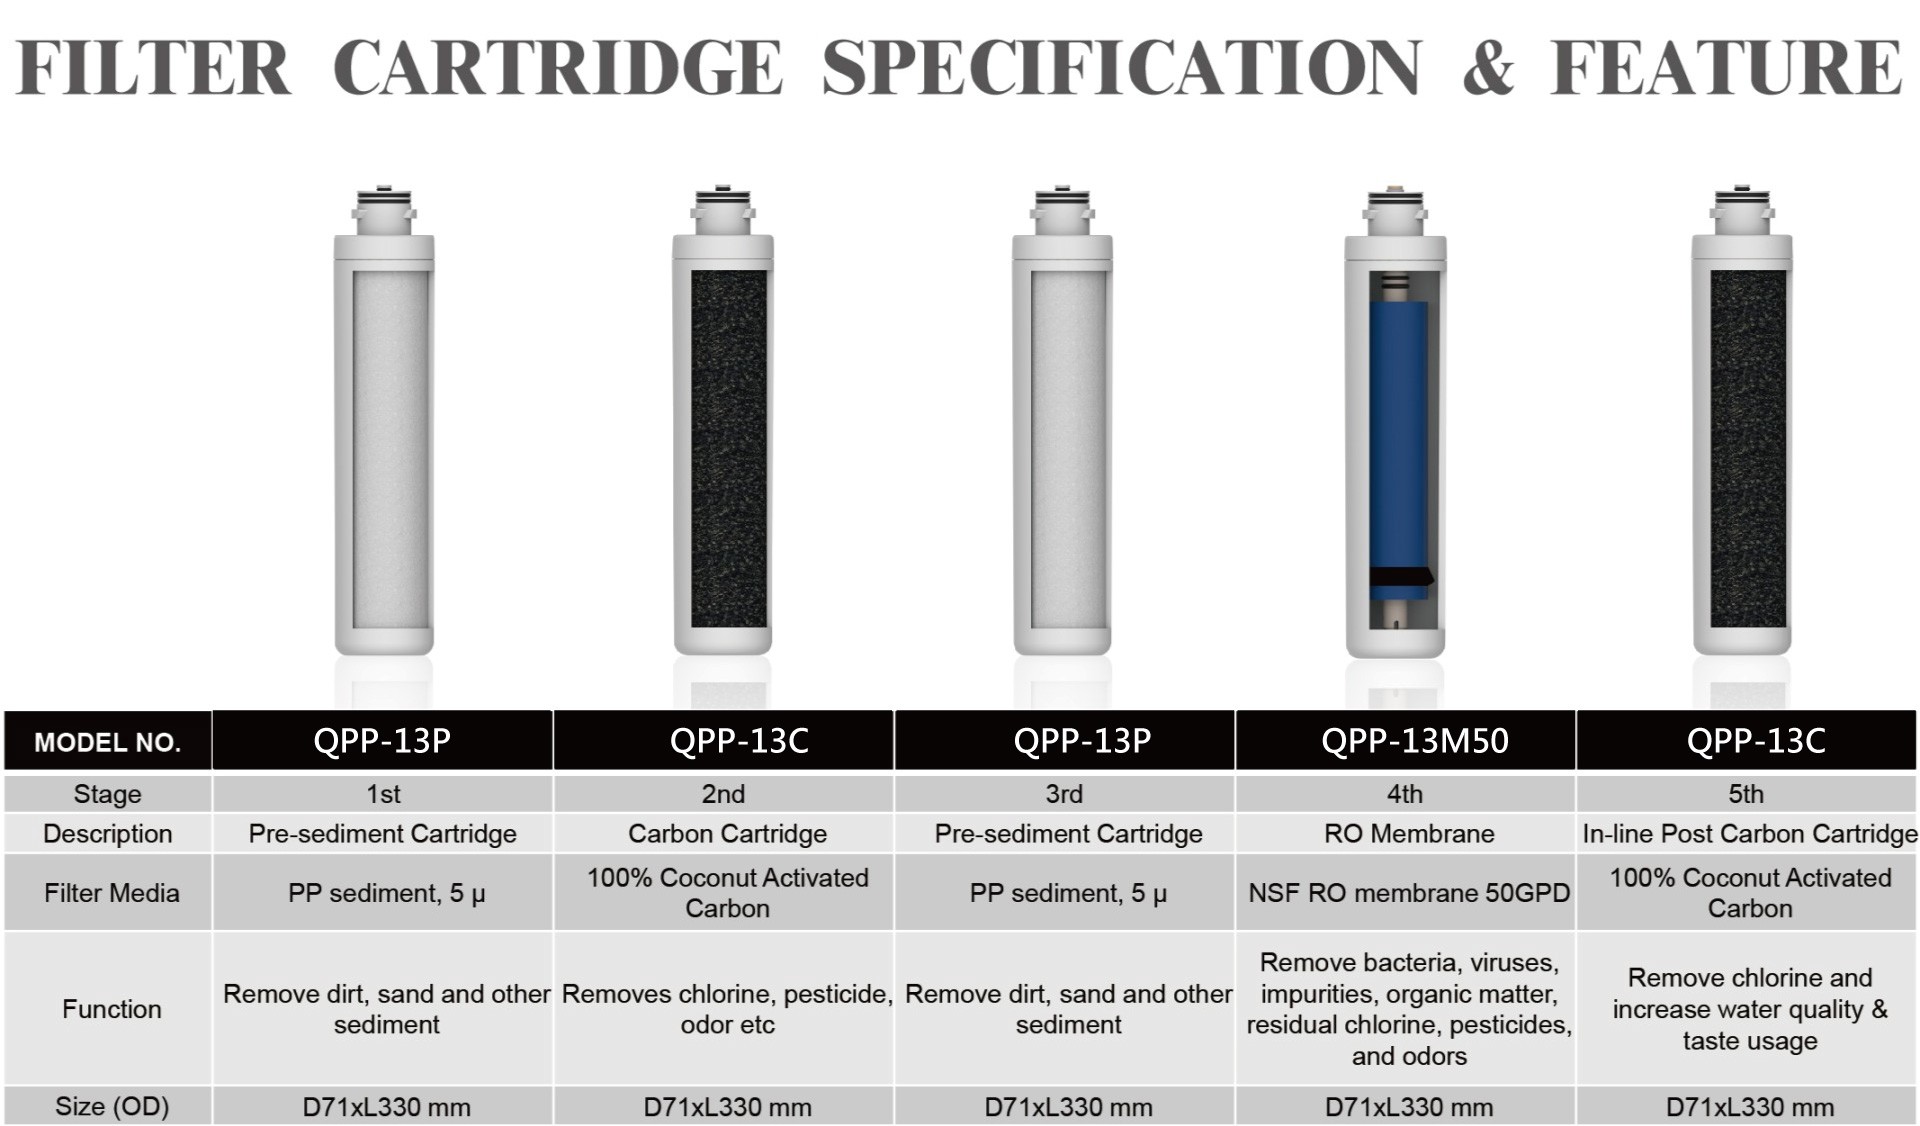 FILTER CARTRIDGE SPECIFICATION & FEATURE